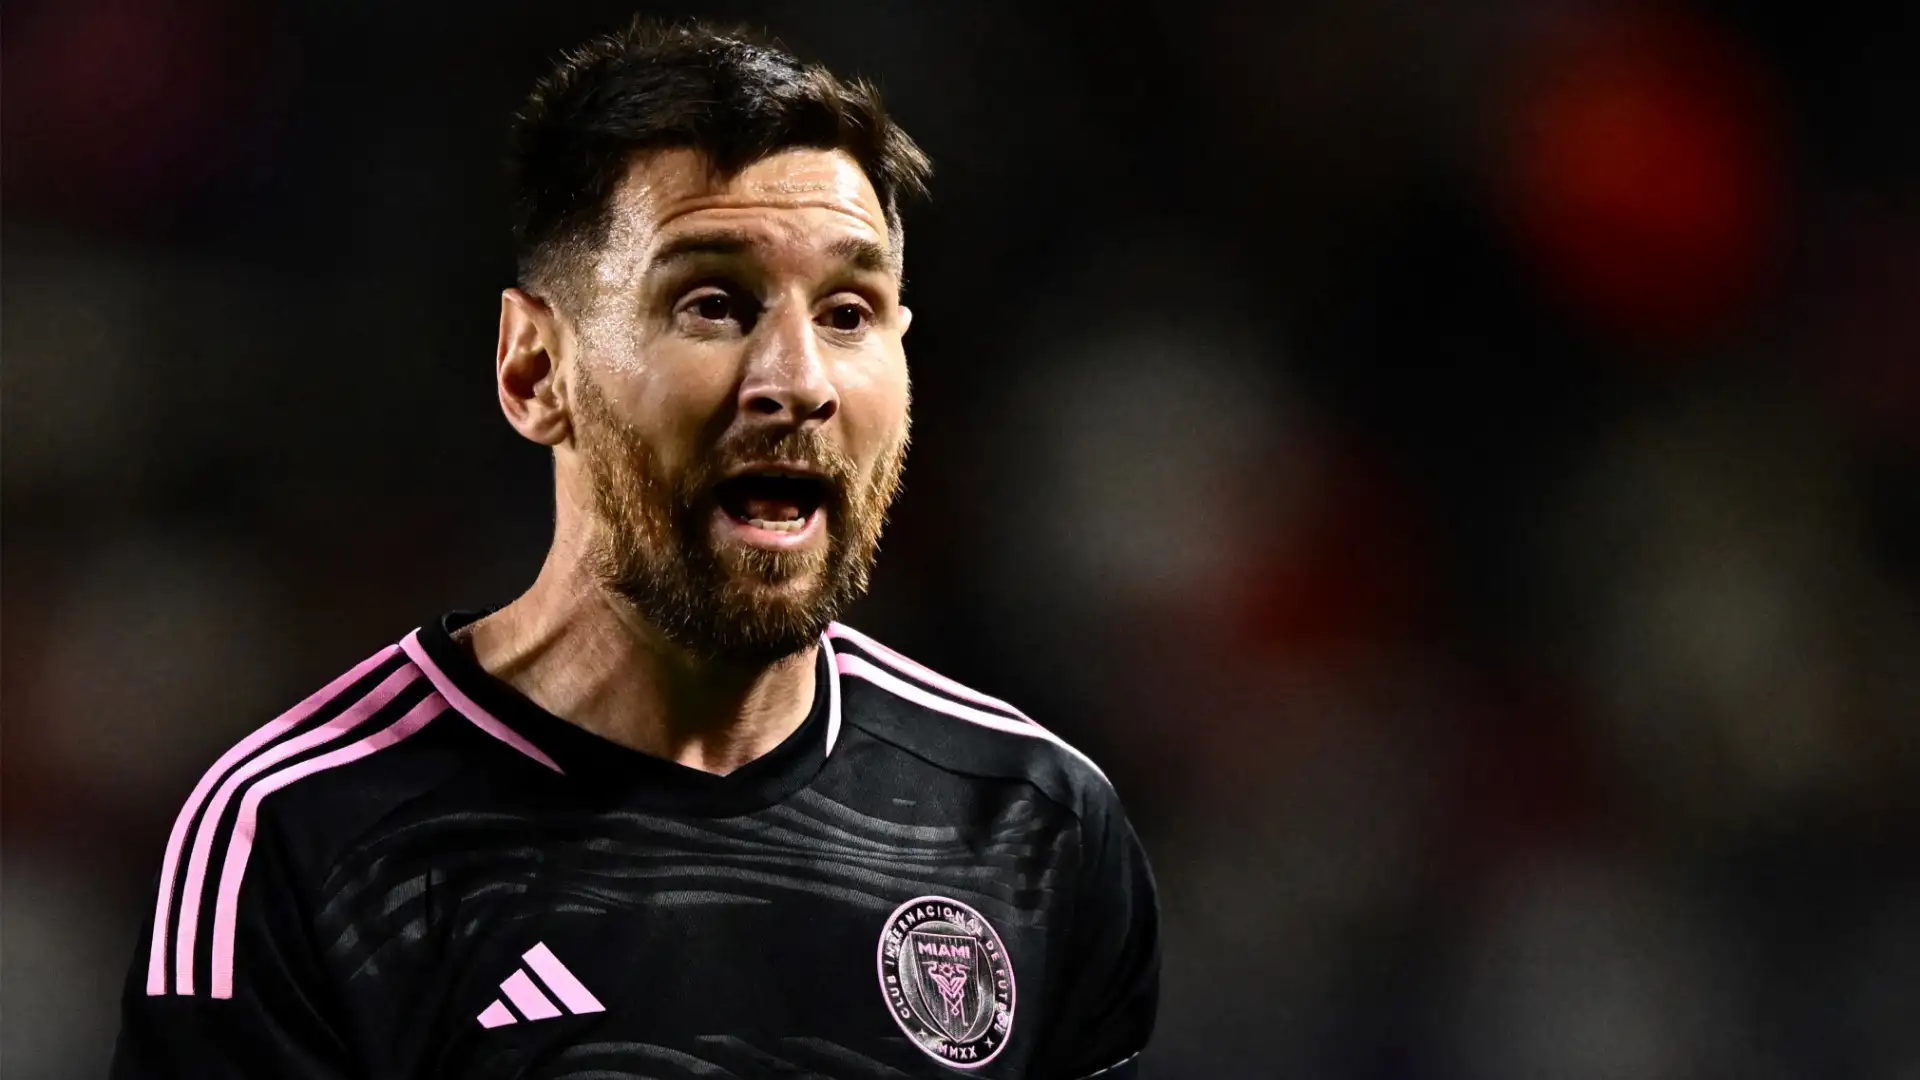 VIDEO: Another injury for Lionel Messi? Concern for Inter Miami & Argentina ahead of MLS & Copa America action